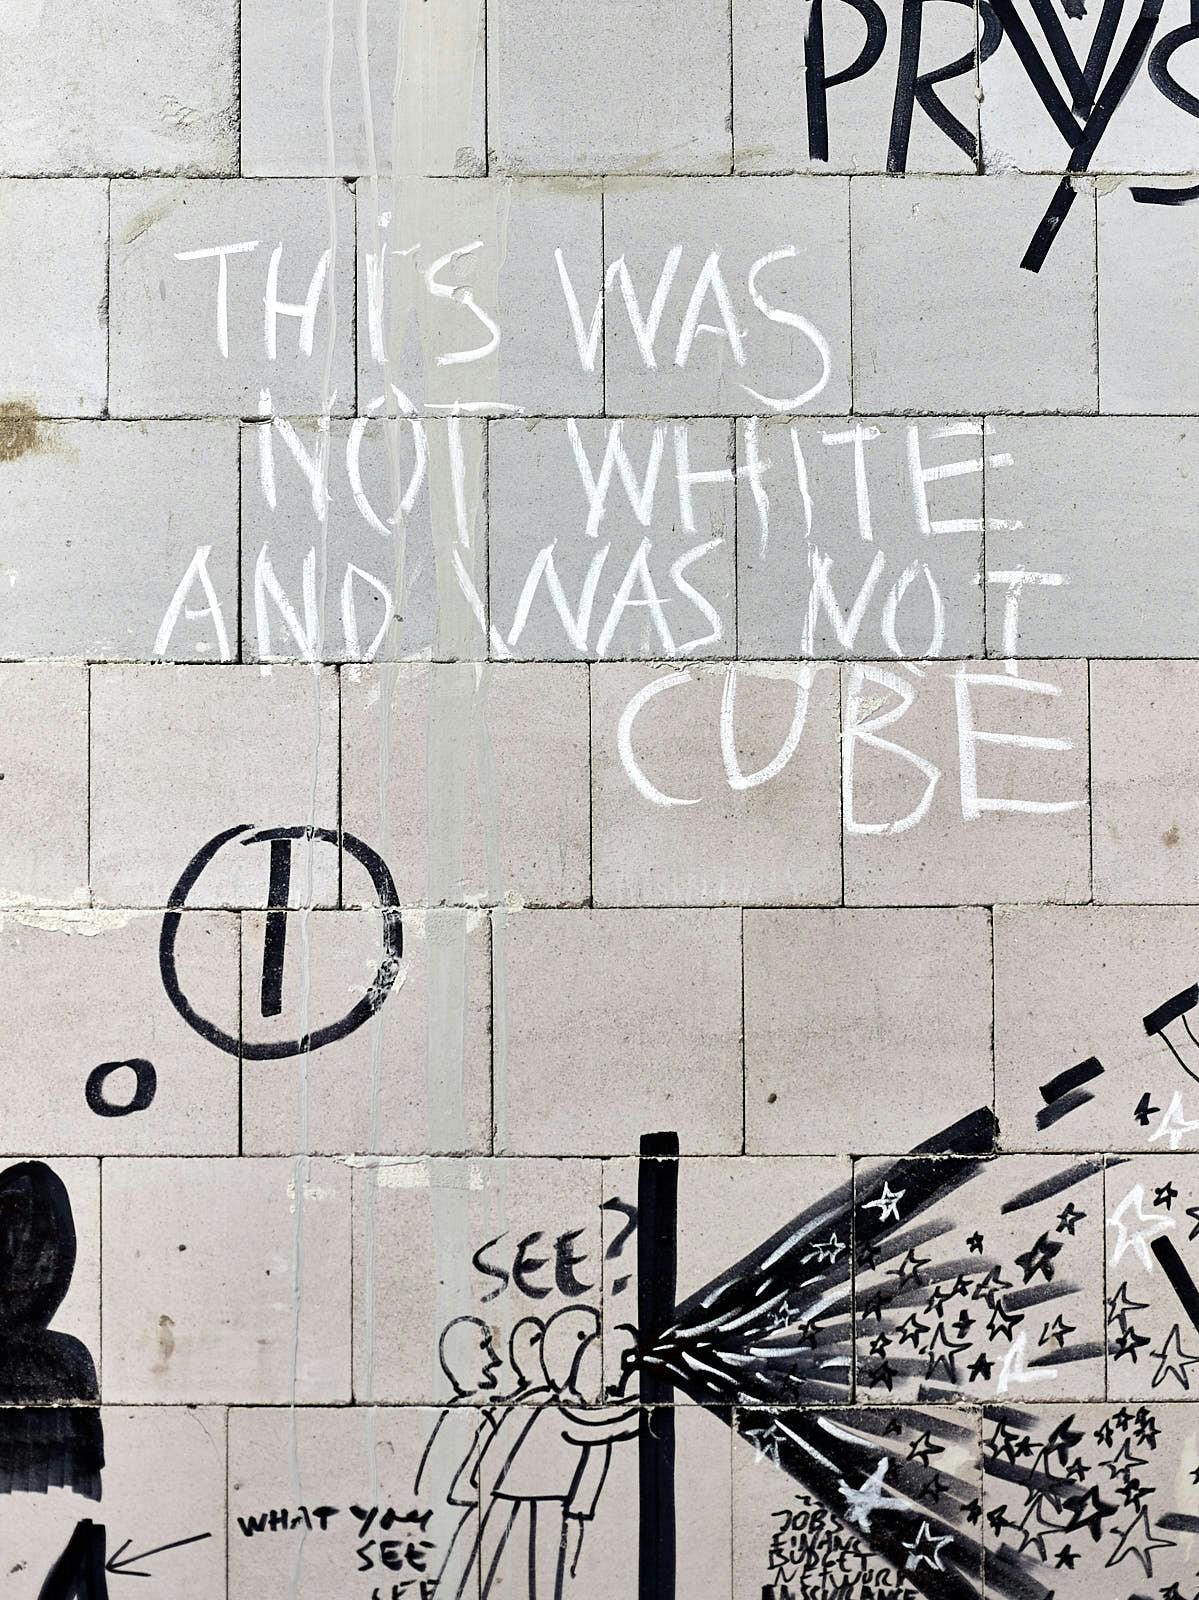 Photo: Written on a raw concrete wall with chalk it reads, this was not white and was not cube.